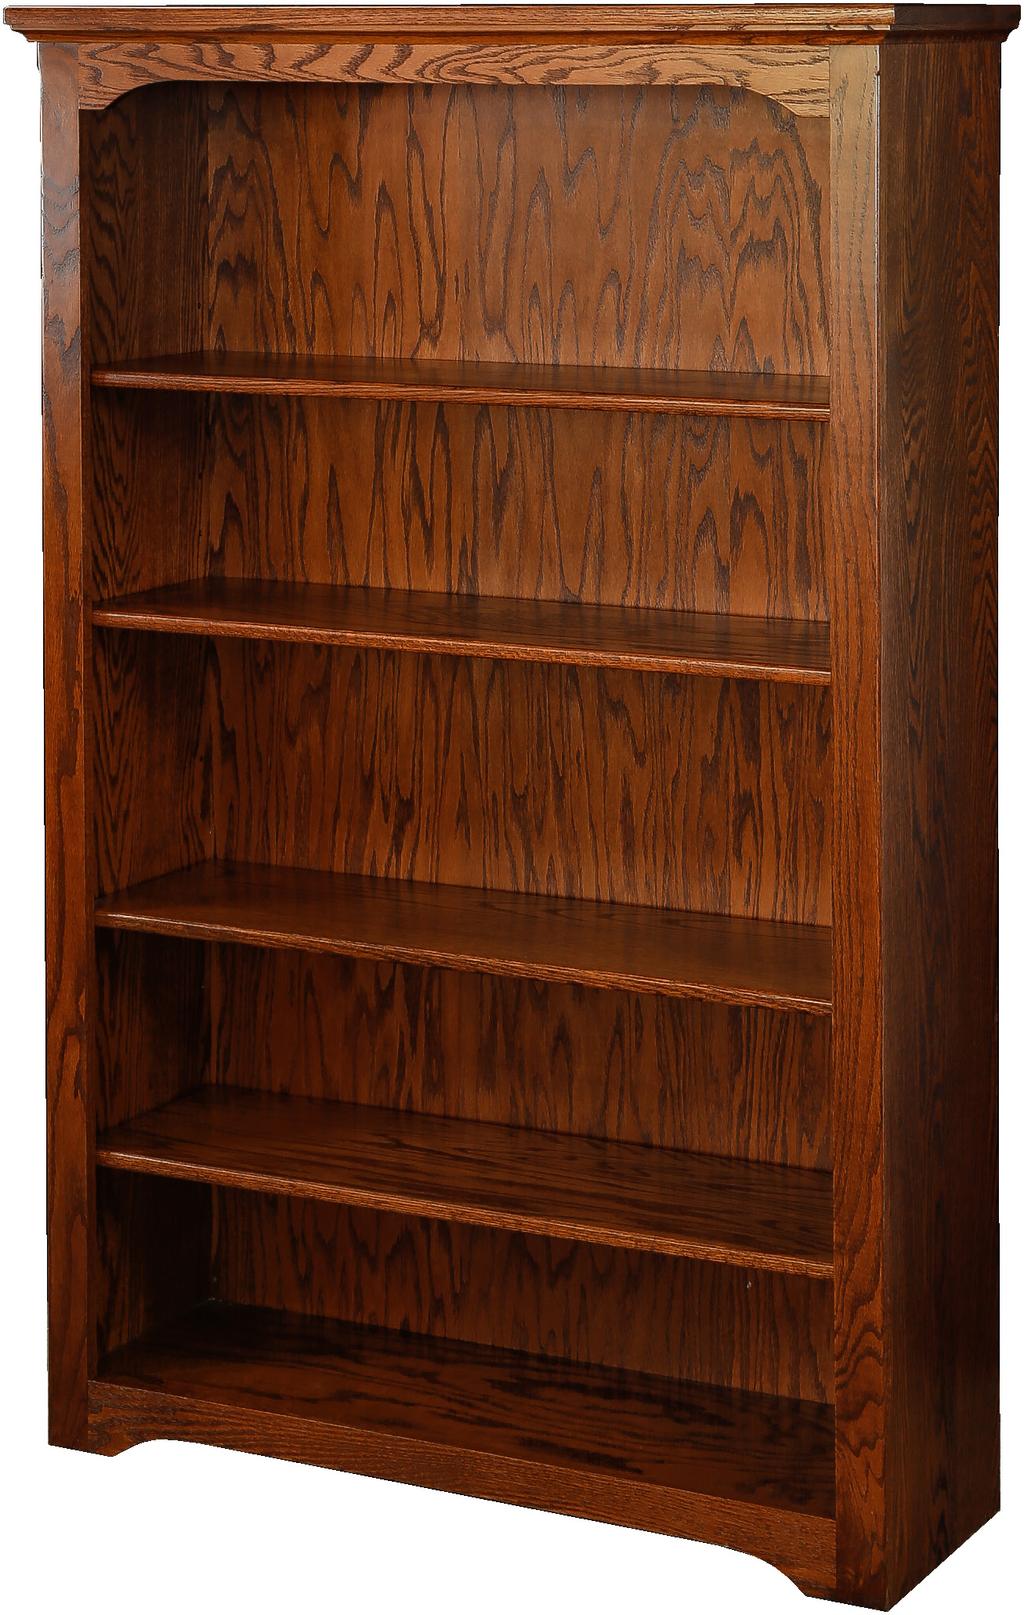 5ft. Bookcase 6ft.